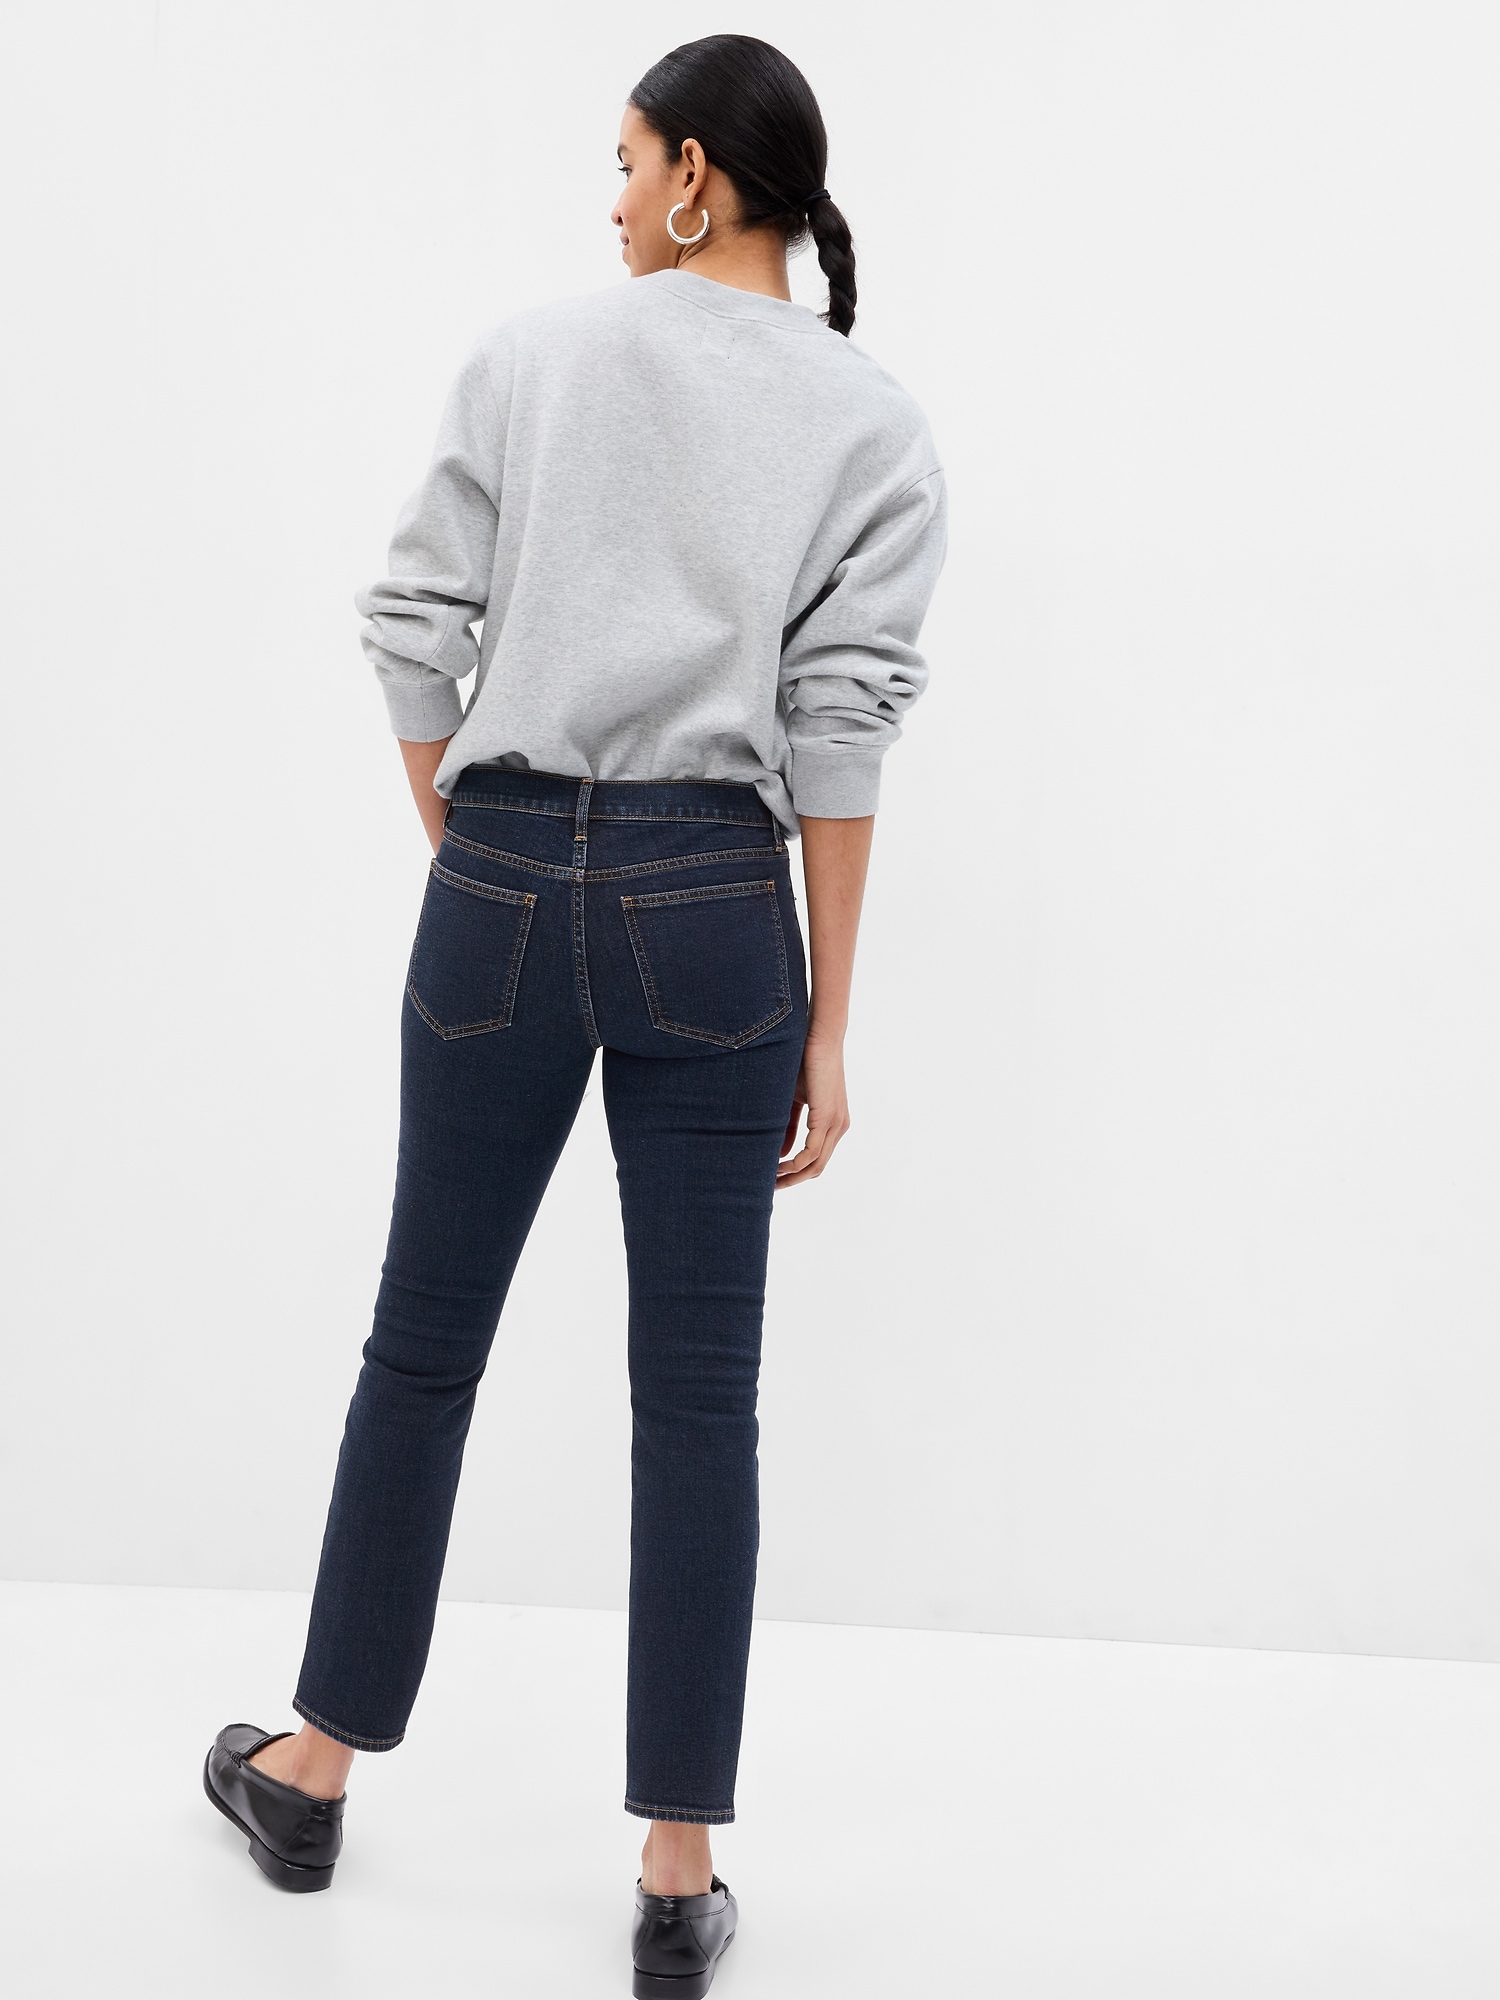 Testing PETITE Jeans Part 2! - Mom Jeans / Baggy Jeans - ASOS